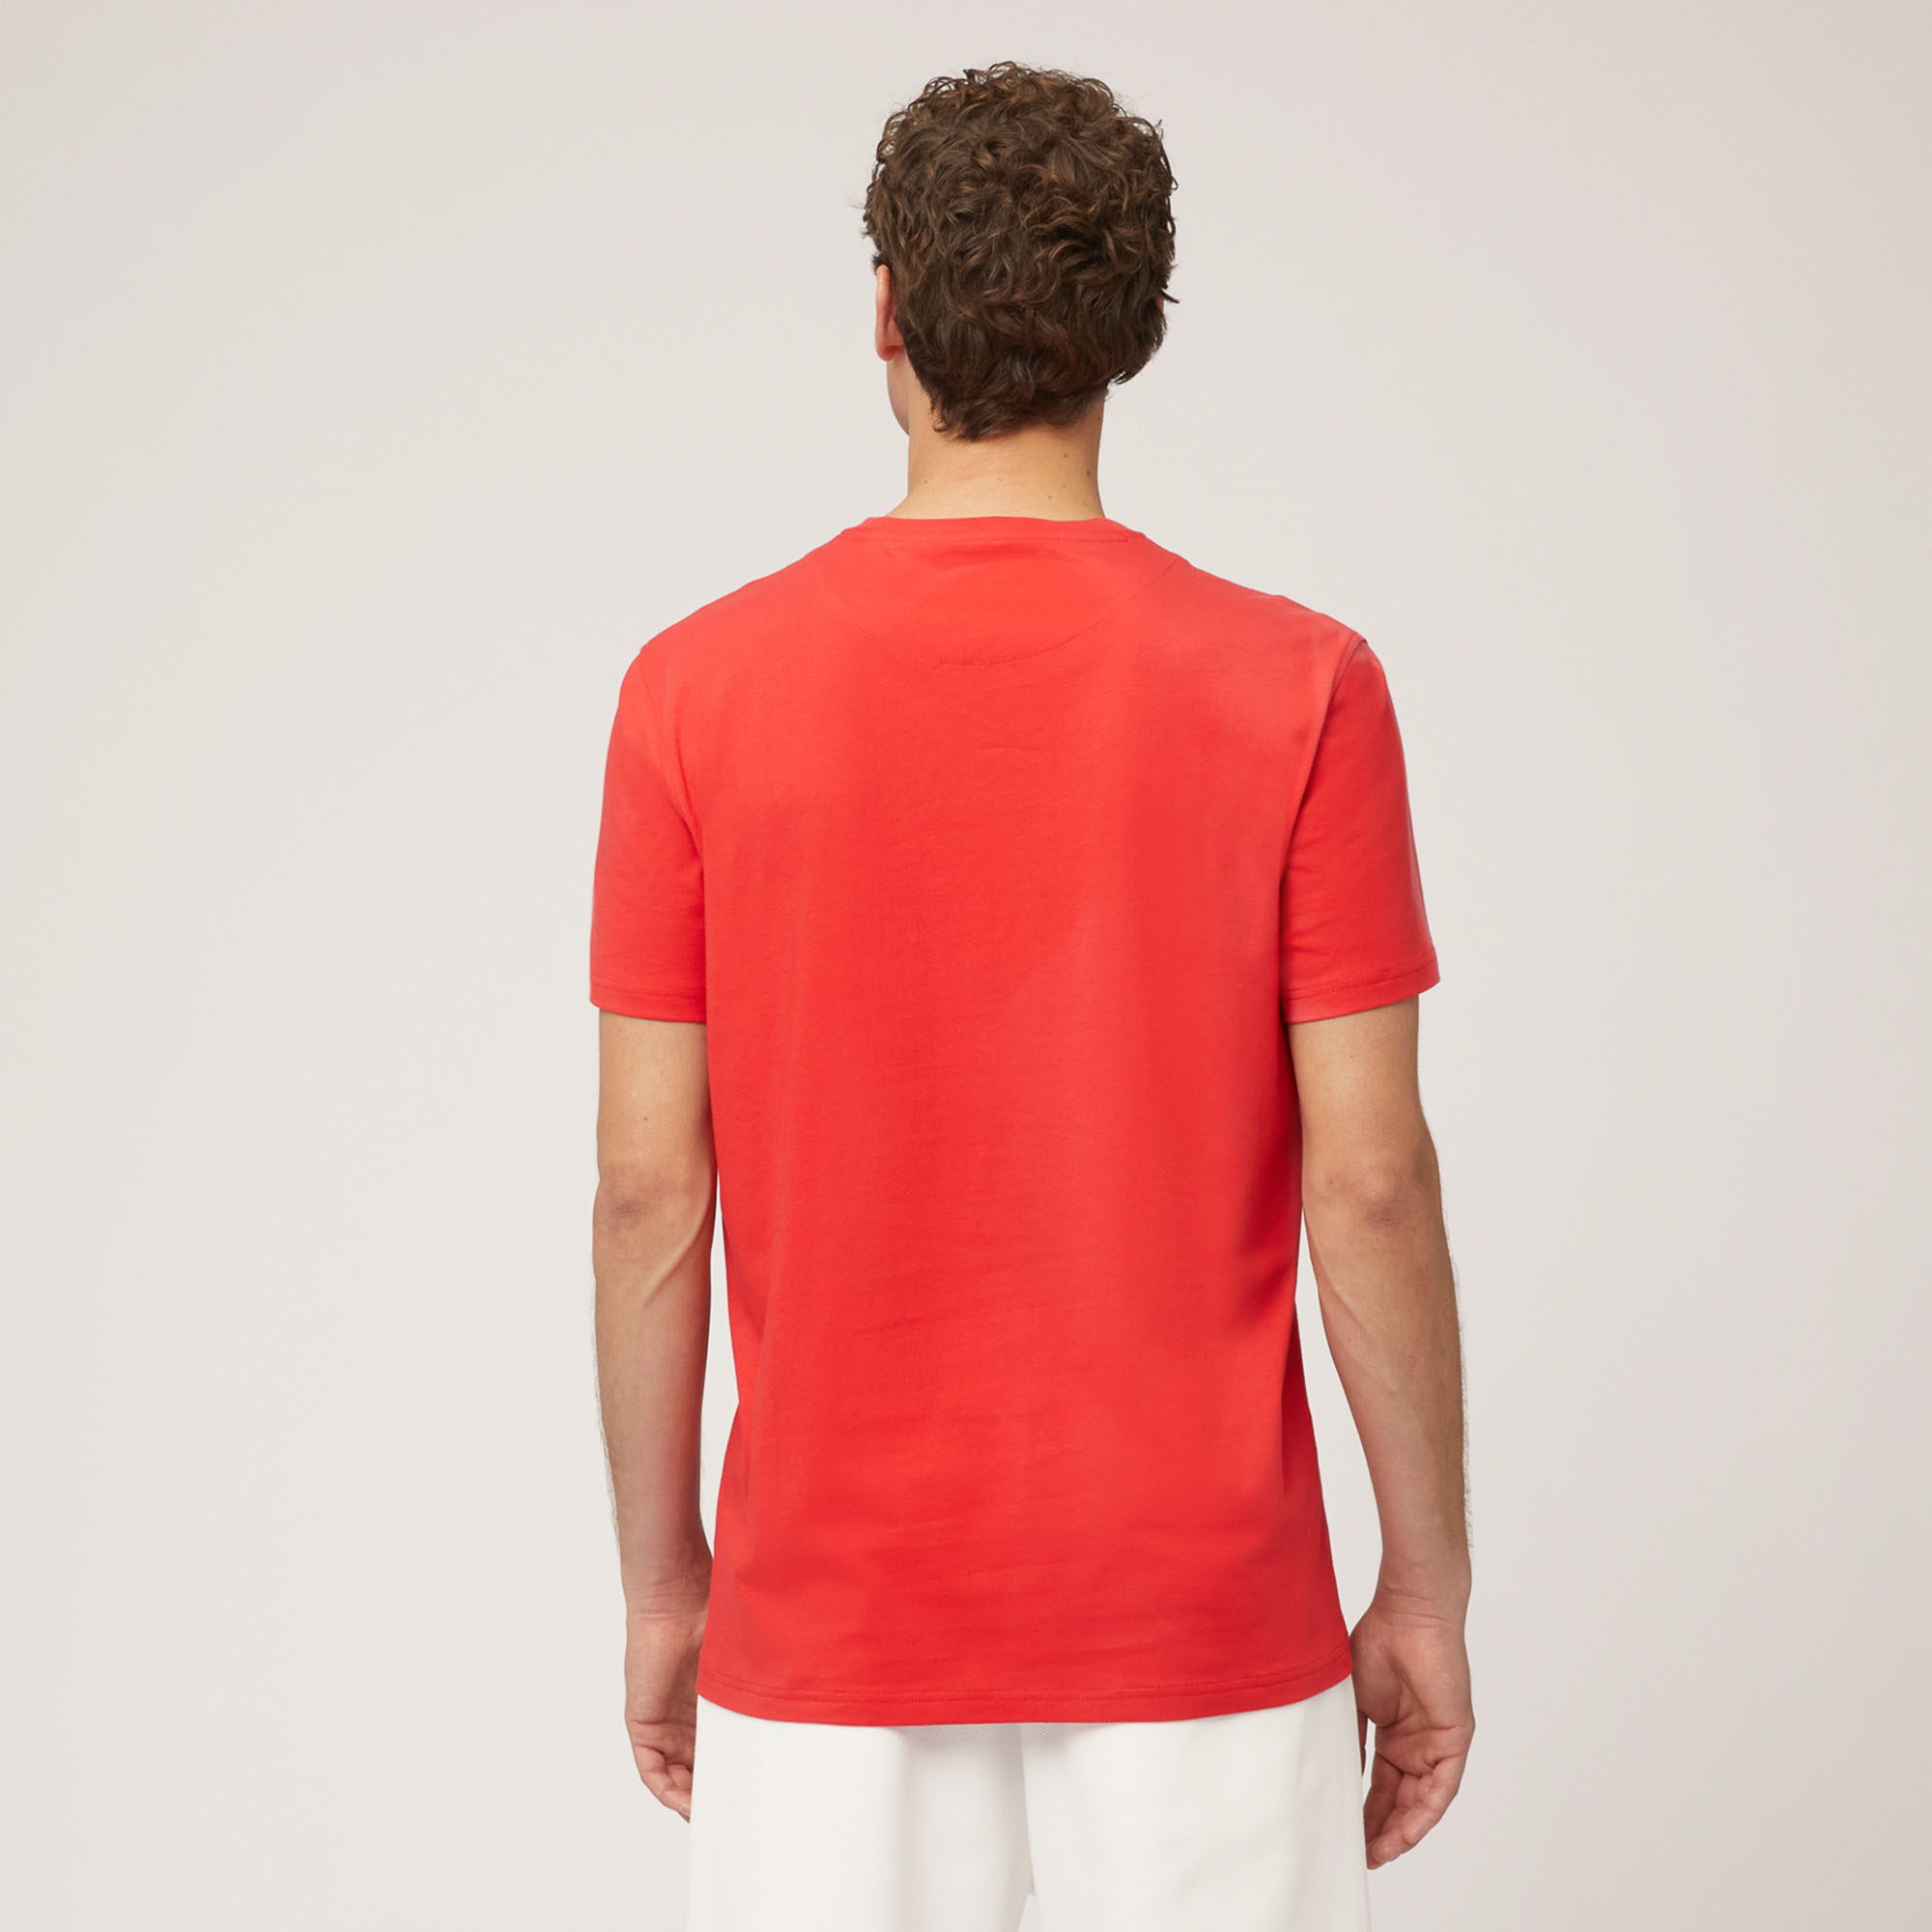 T-Shirt Con Taschino, Rosso Chiaro, large image number 1